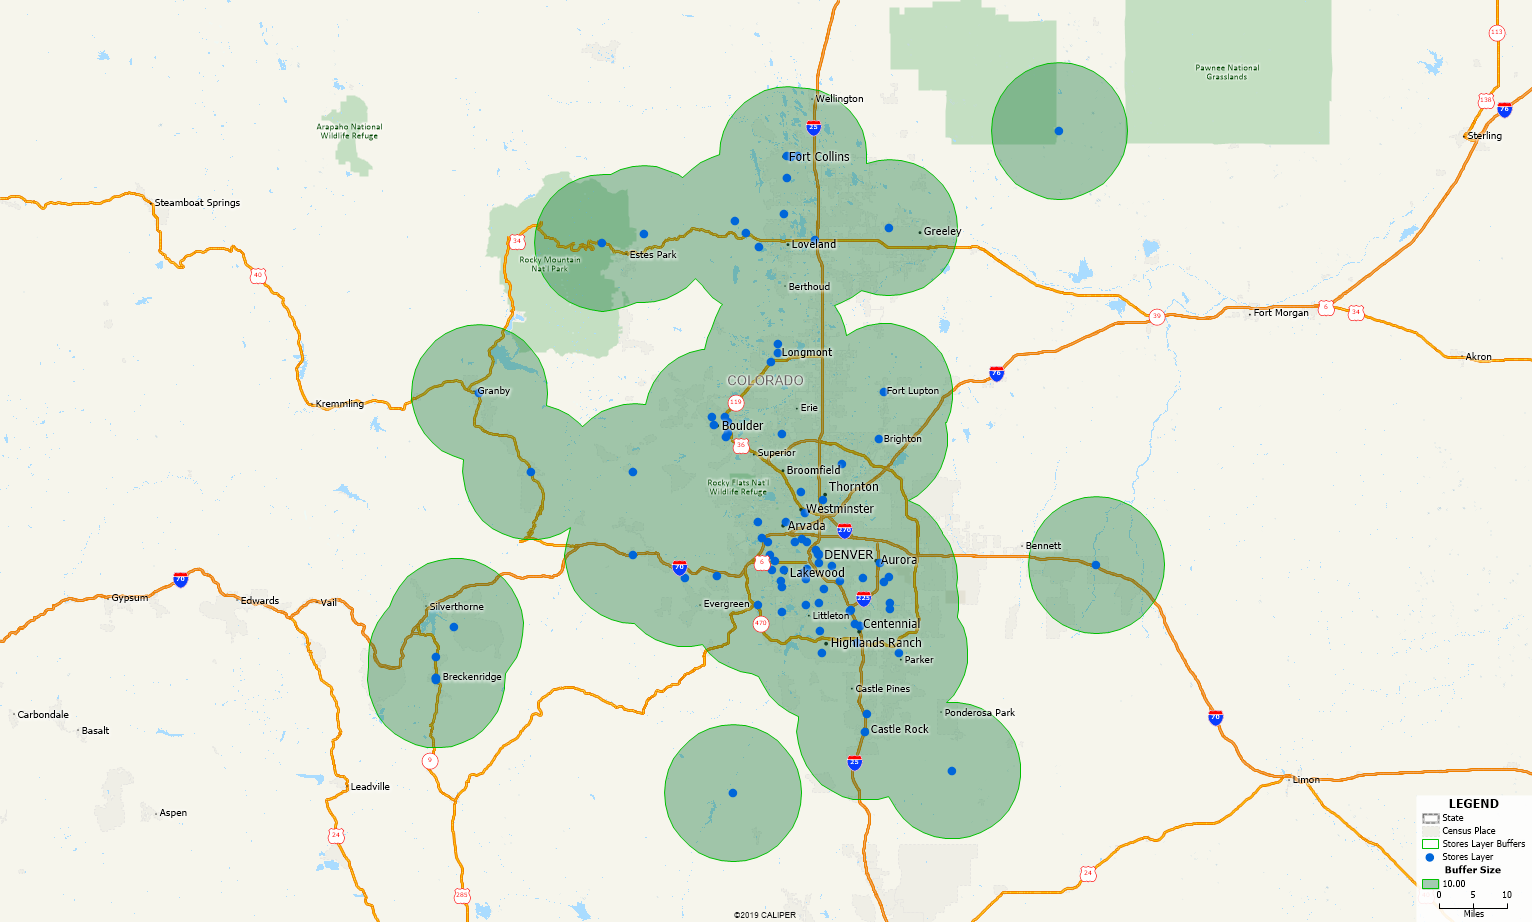 How Can I Find a List of all ZIP Codes within 10 Miles of my Data? Map of Buffers.